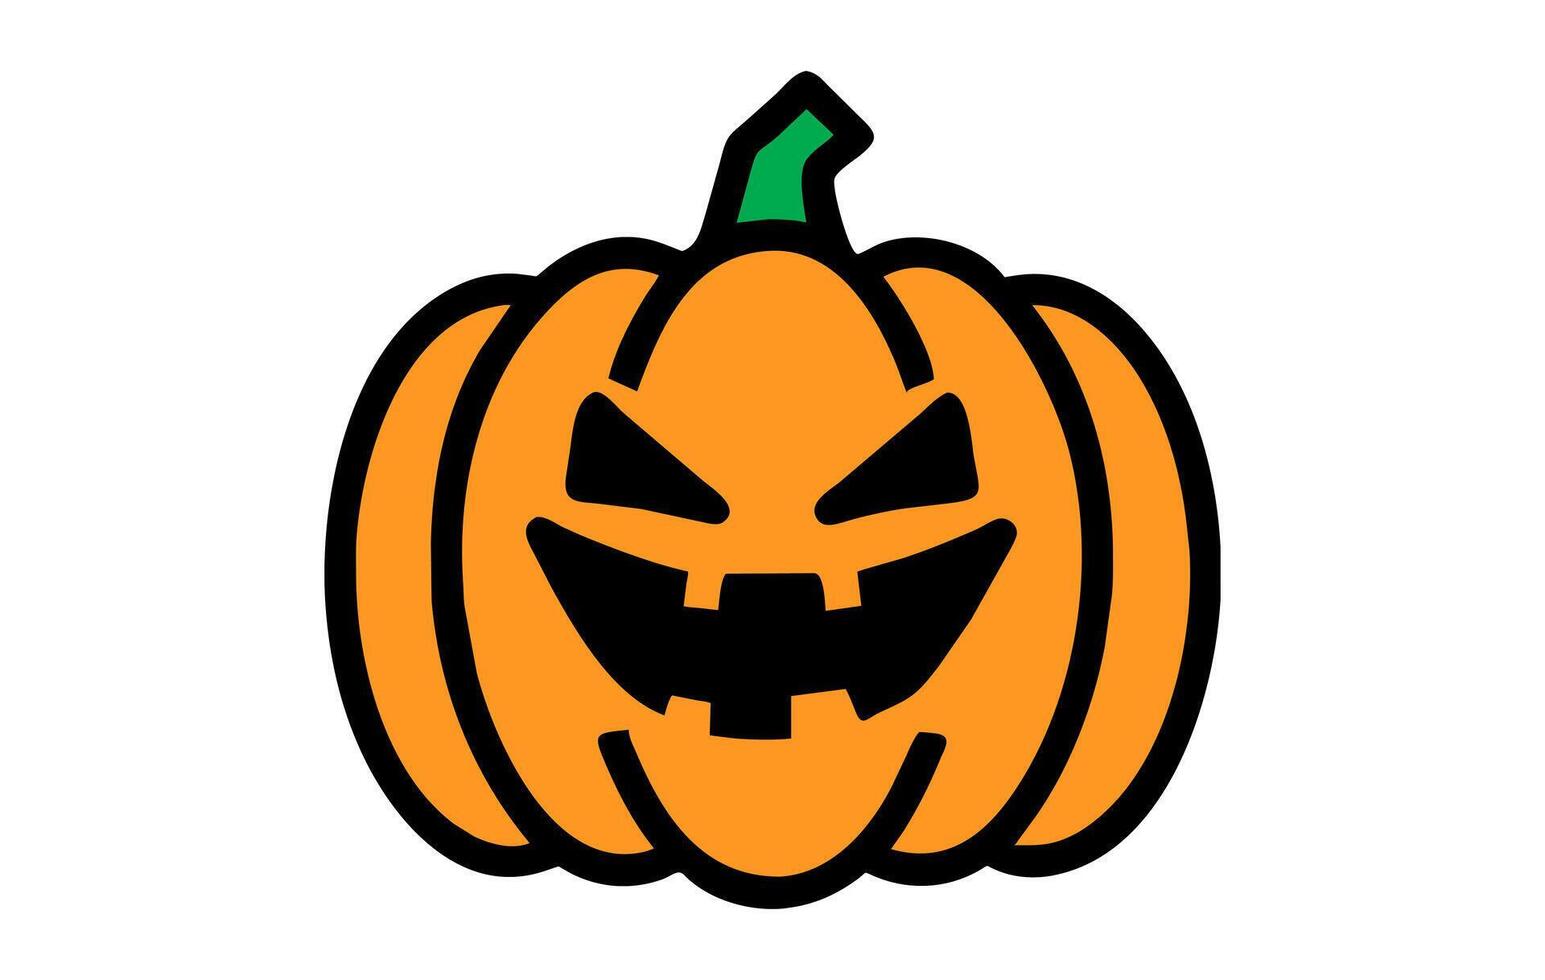 Carved Halloween pumpkin with a fierce face. Jack-o-lantern illustration. Isolated on white background. Concept of Halloween, spooky decoration, trick or treat, and holiday celebration. Icon vector